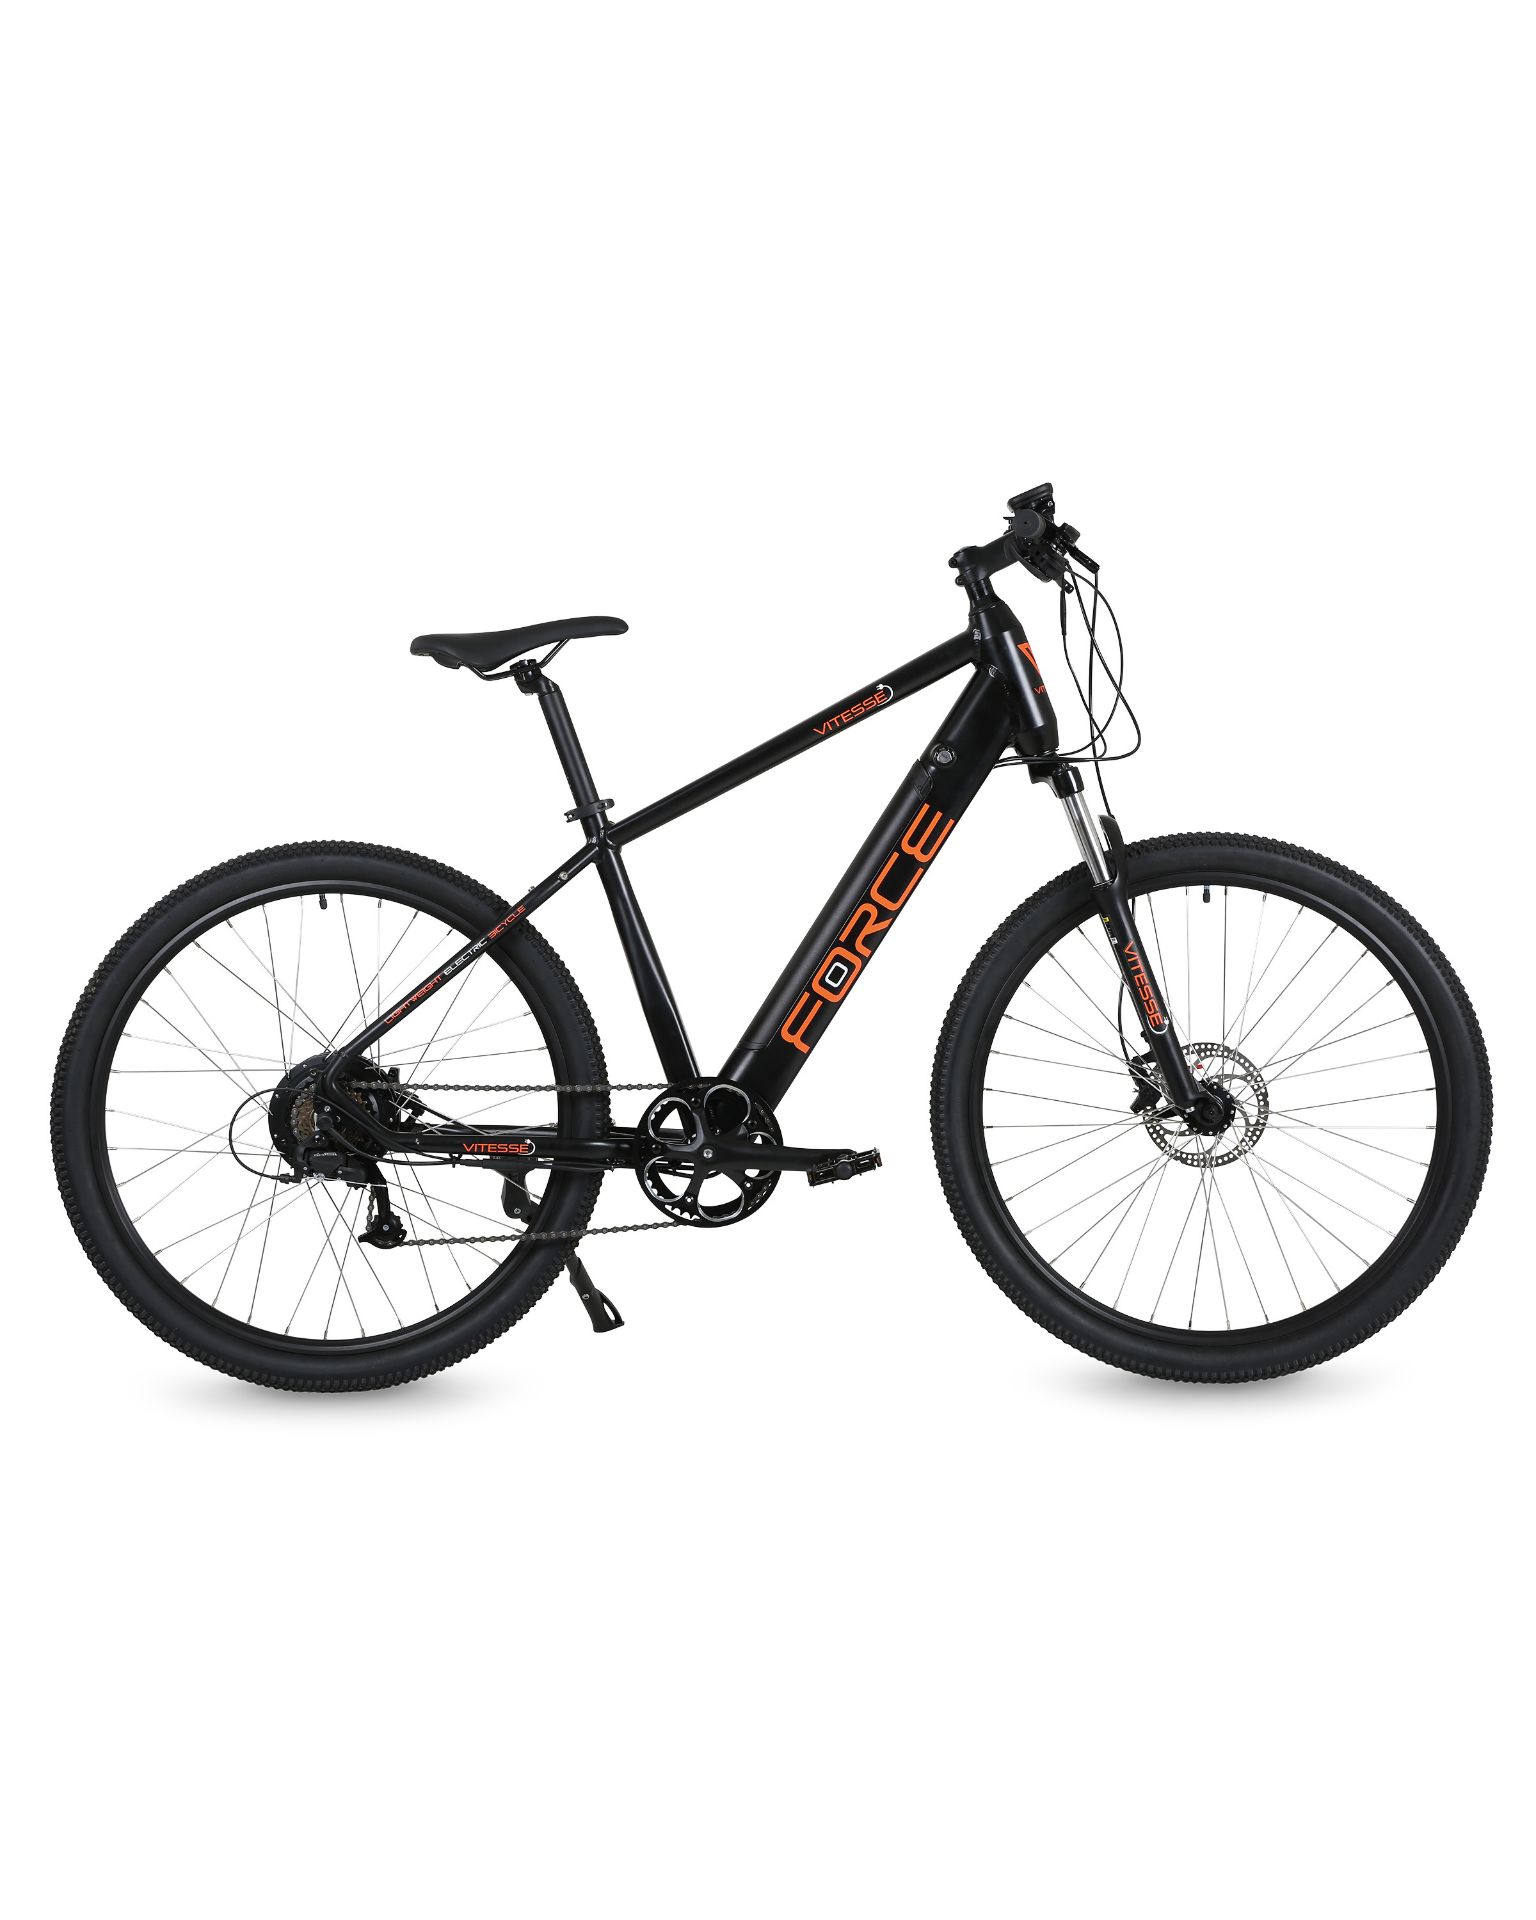 1 VITESSE FORCE MTB WM ELECTRIC BIKE WITH CHARGER RRP Â£1199